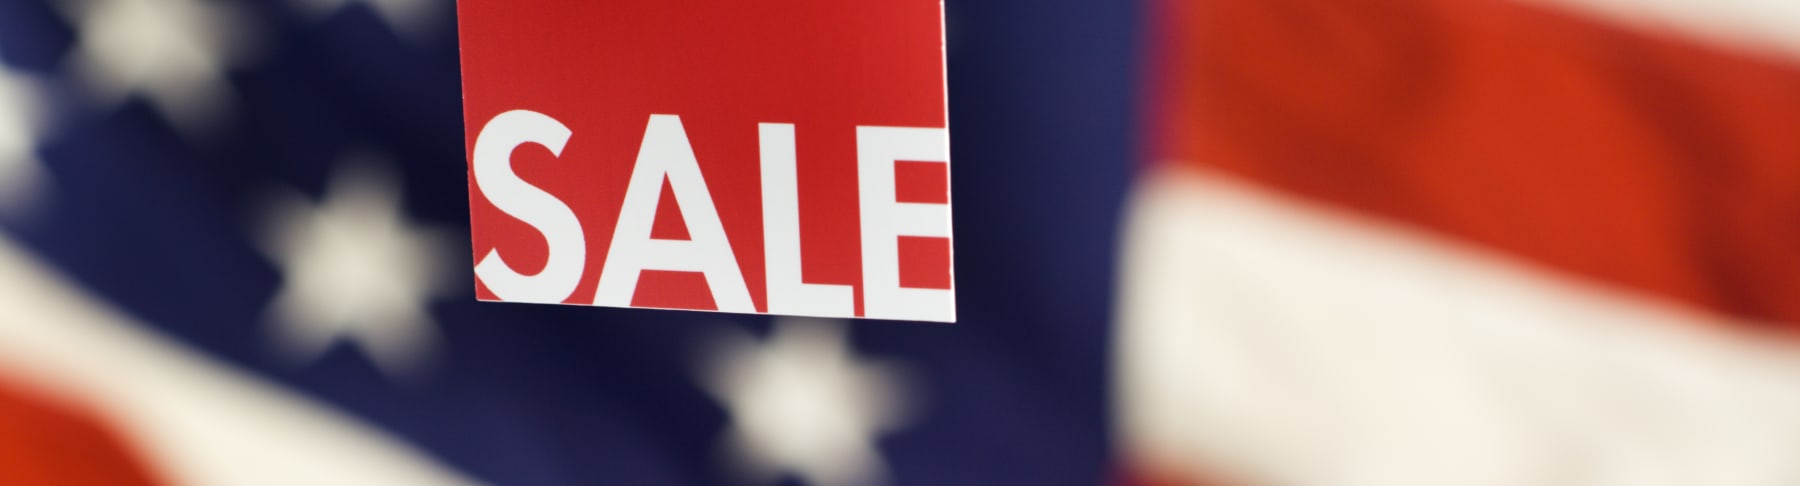 Sale sign hangs in front of American flag.